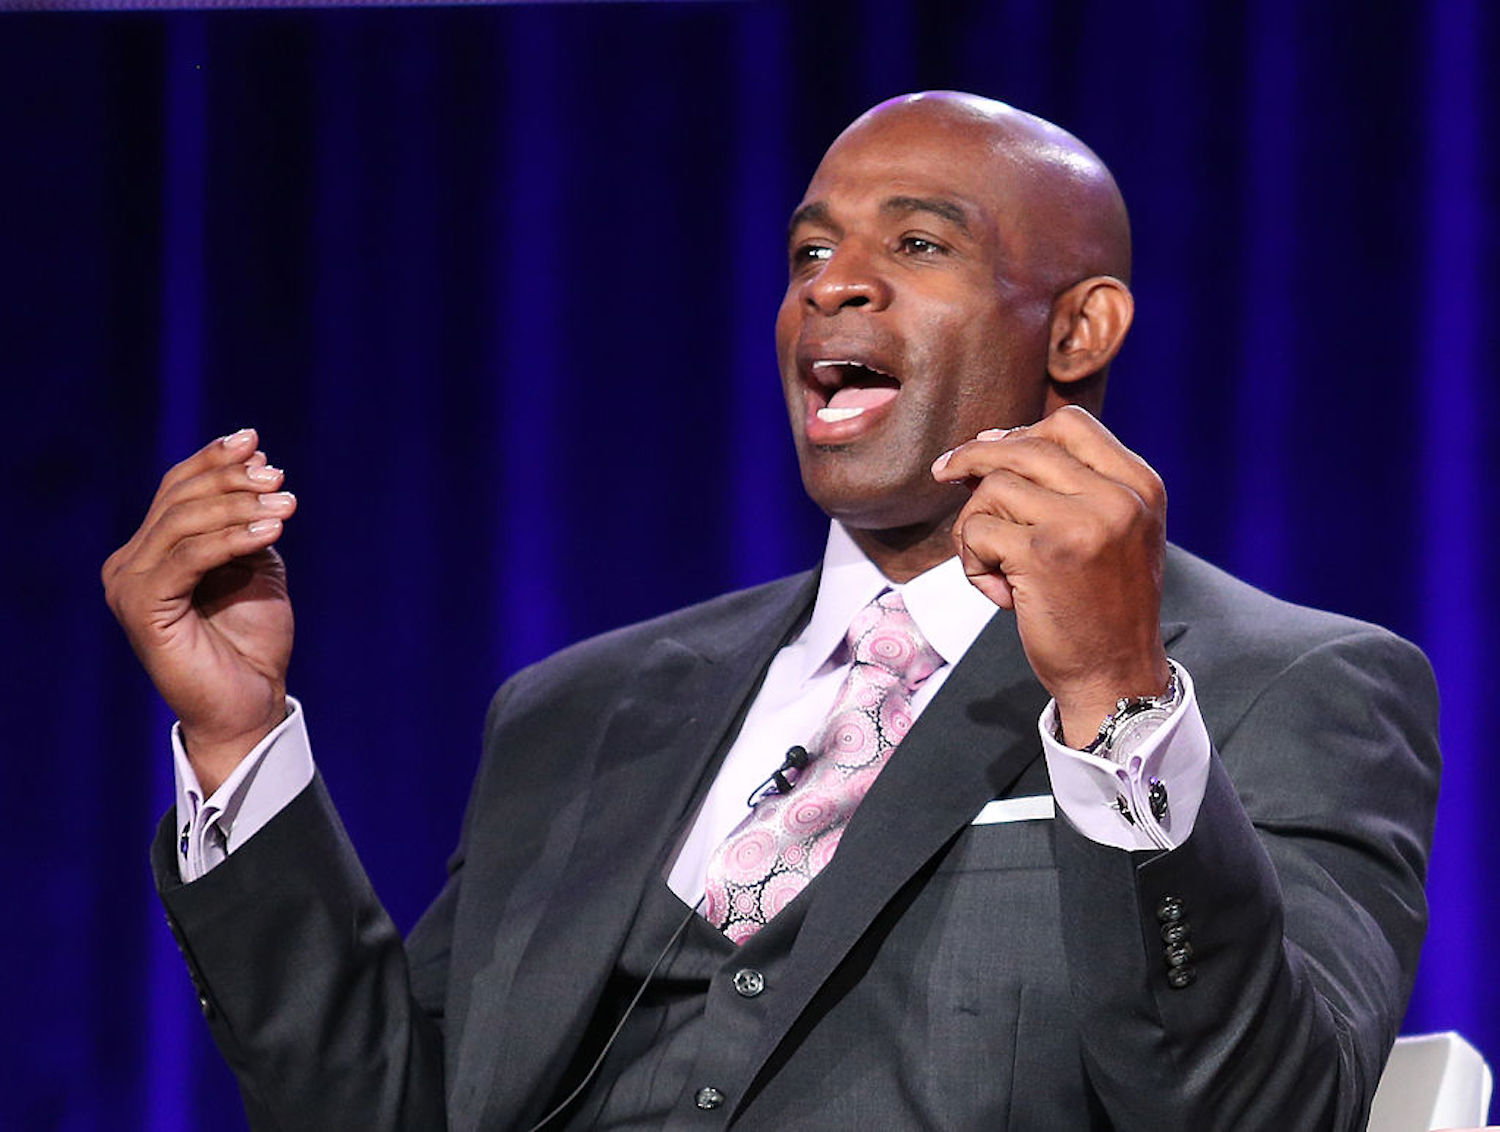 Deion Sanders has been wanting a bigger platform to share his uncut opinions, and he finally found it with Barstool Sports.